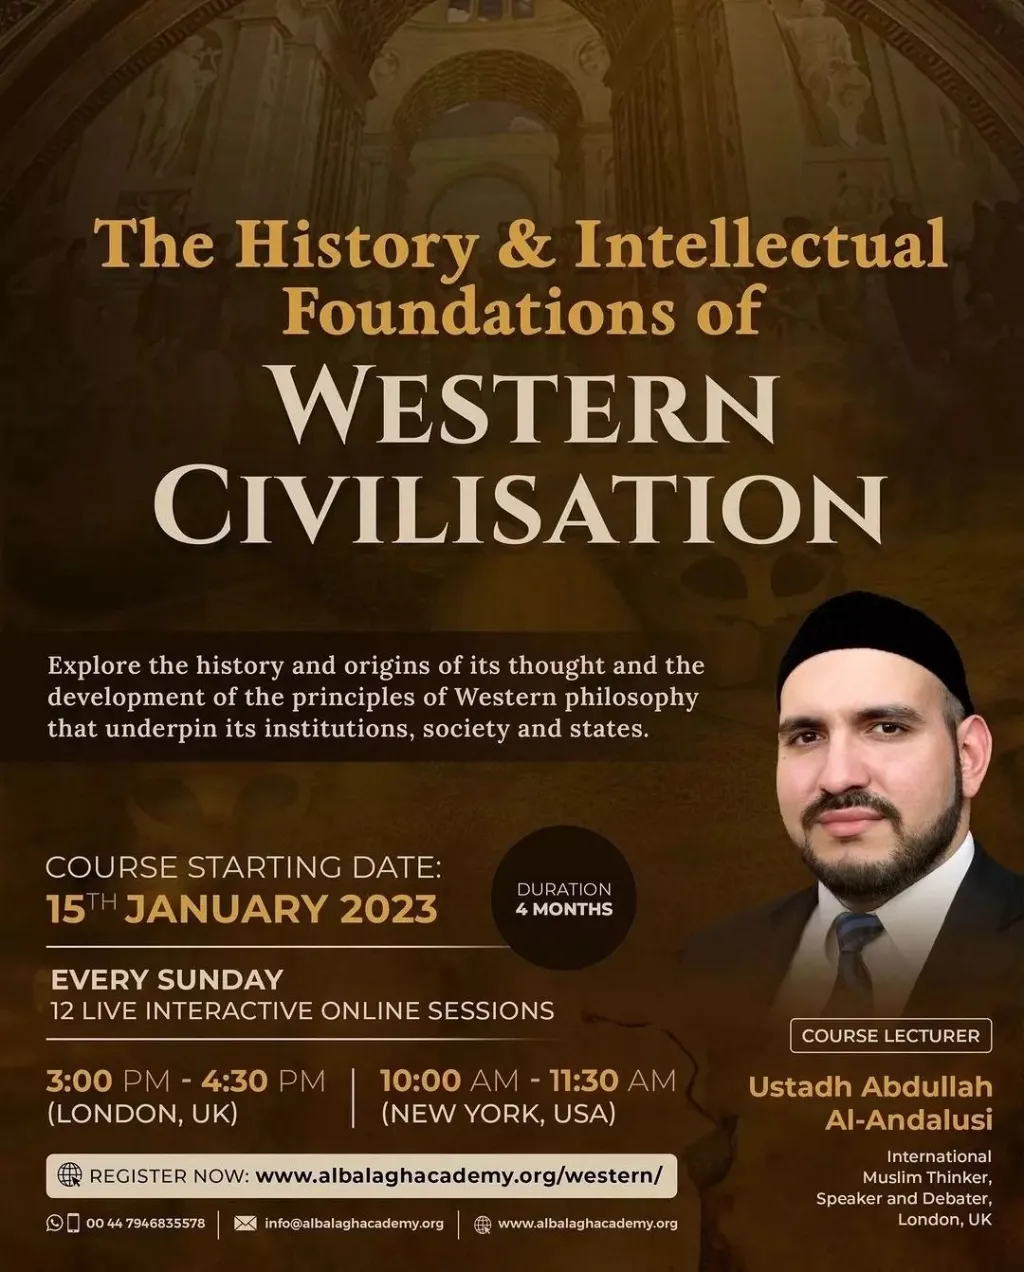 A Study of the the History and Intellectual Foundations of Western Civilisation (from the Islamic lens)